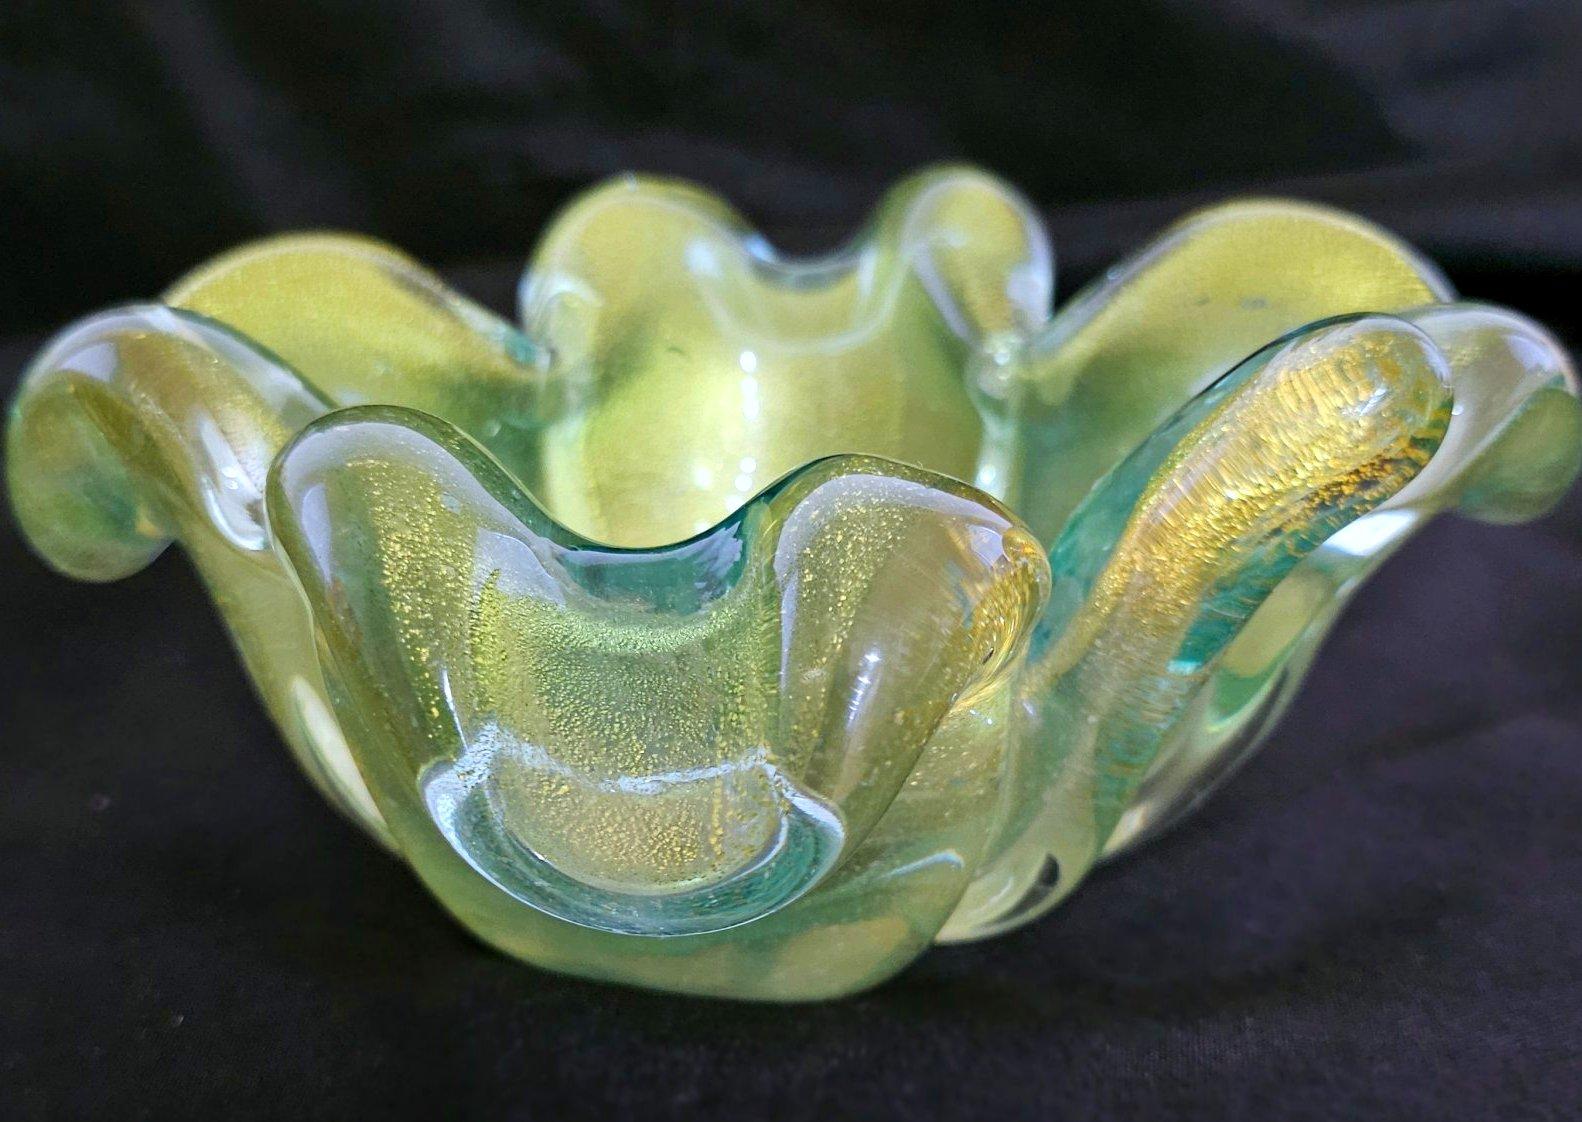 Vintage Murano Glass Bowl with Gold Polveri, Barovier & Toso 
are believed to be the creators, though Seguso once made similar. 
Either way, you've just found a beautiful four leaf clover!
Very good vintage condition. No chips or cracks.
Measures